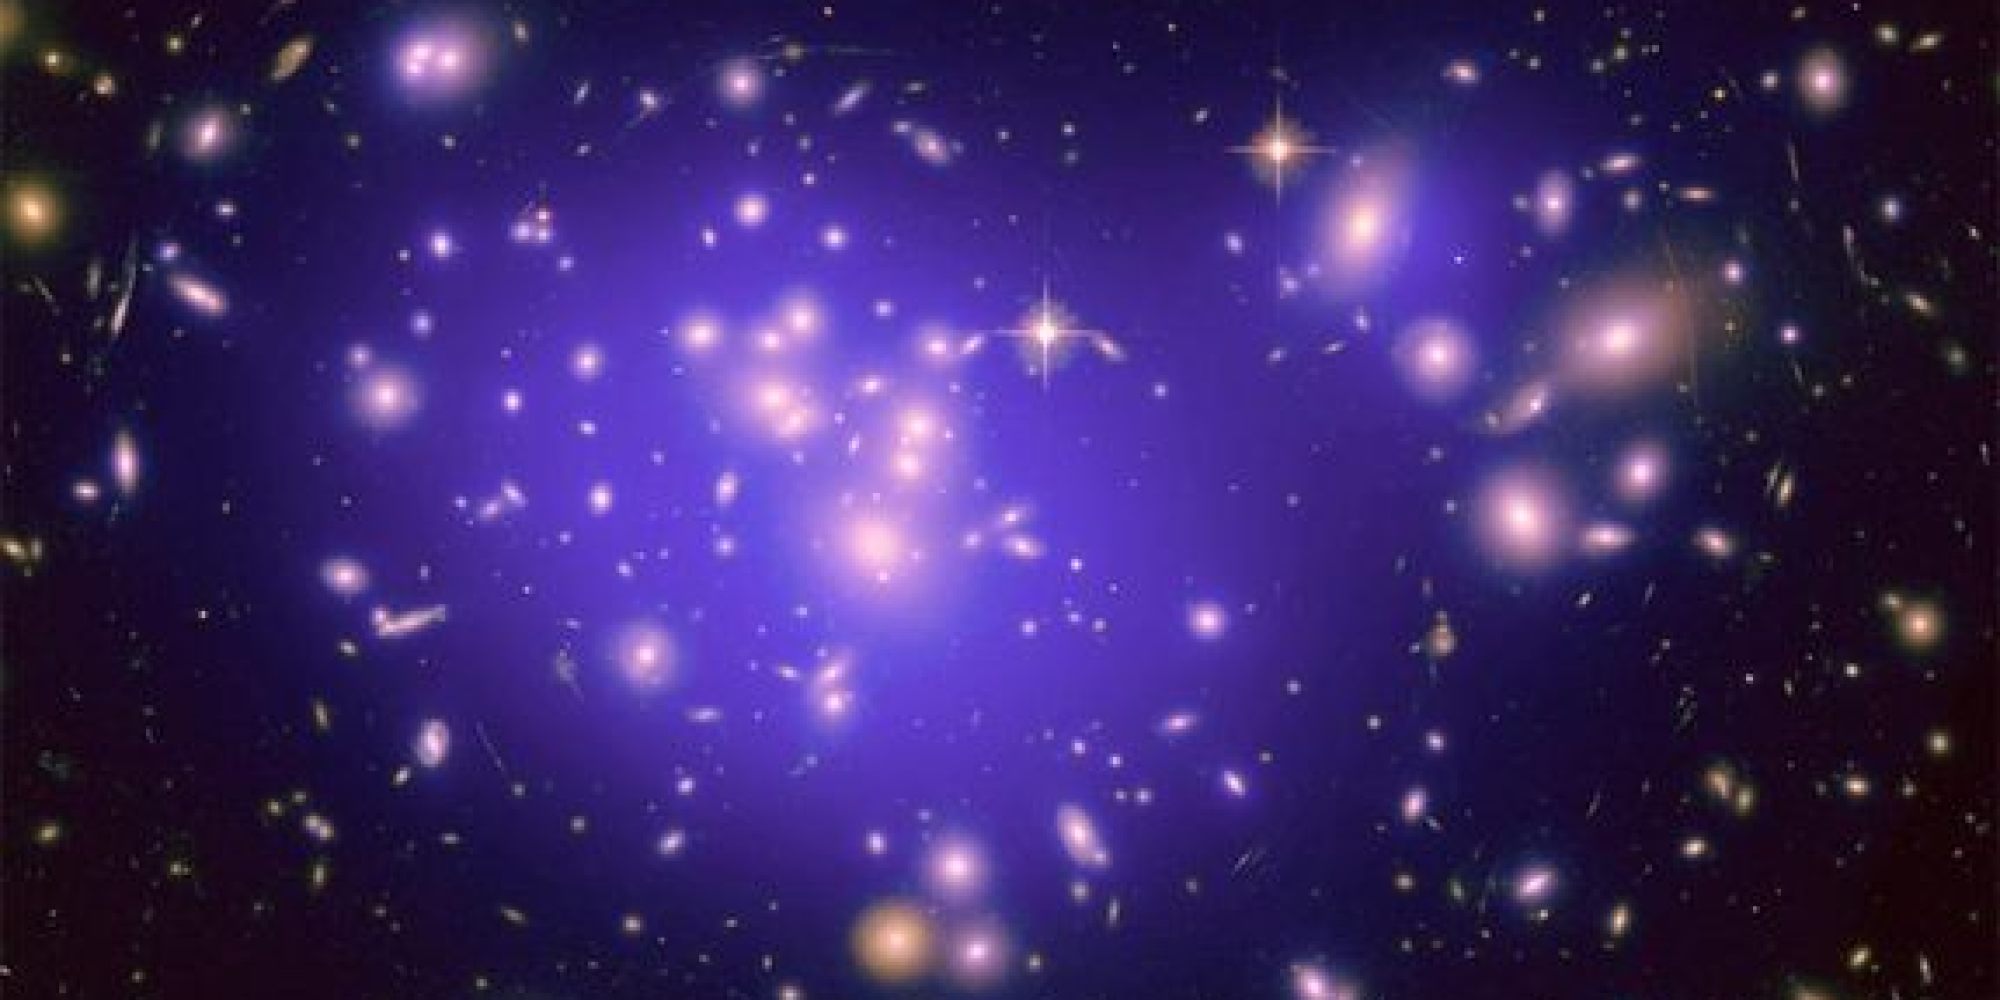 Universe Is Expanding Symmetrically, 'Real-Time' Analysis Shows | HuffPost